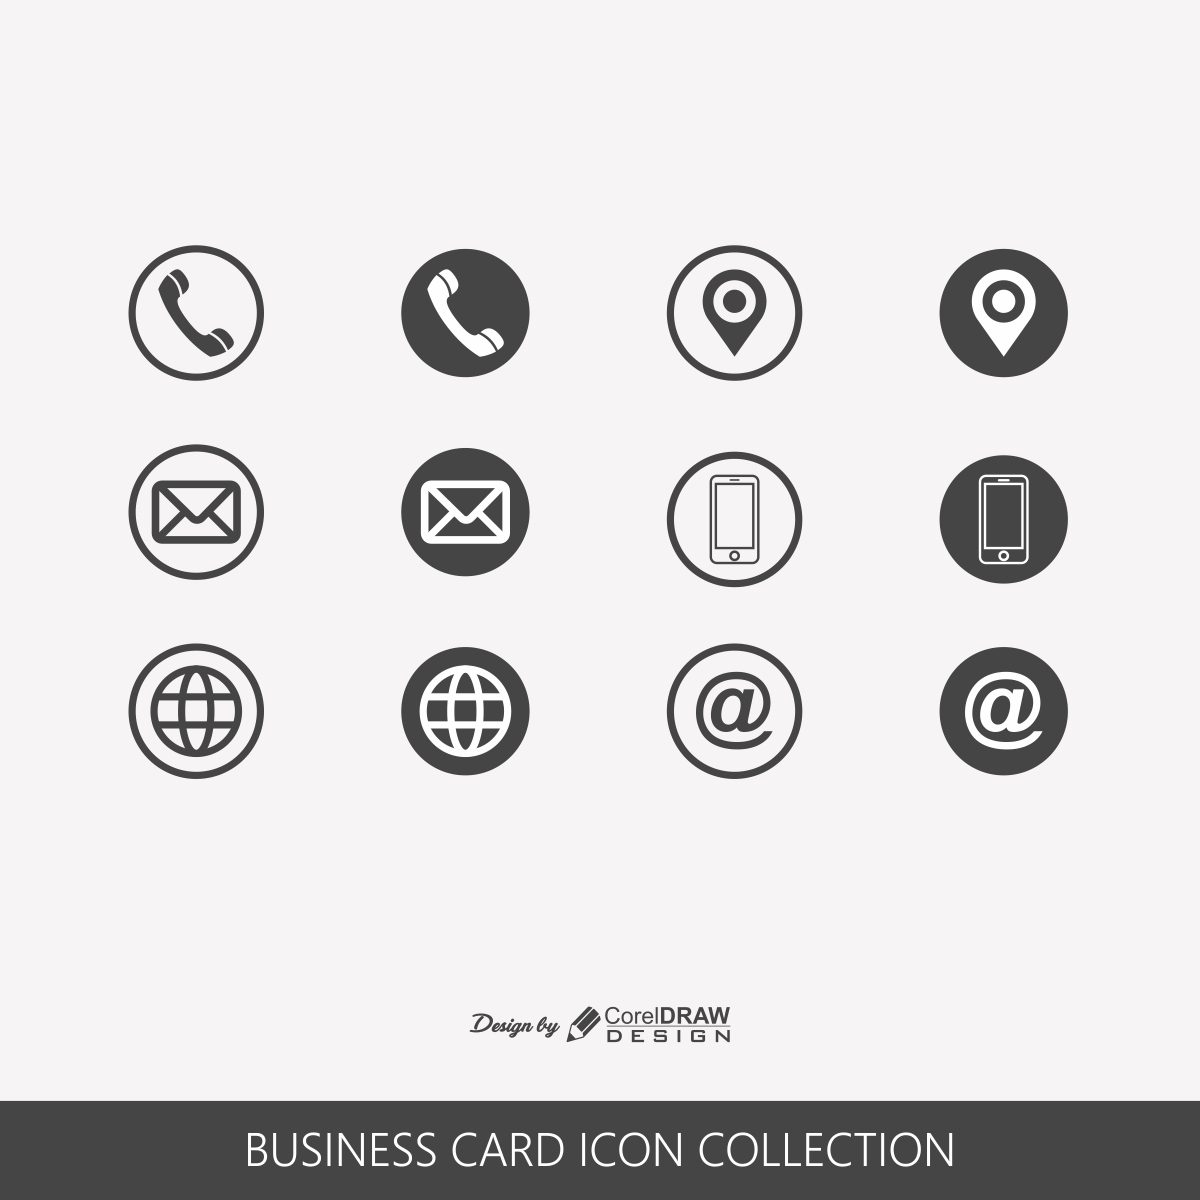 Download Business Card Icon Collection Coreldraw Design Download